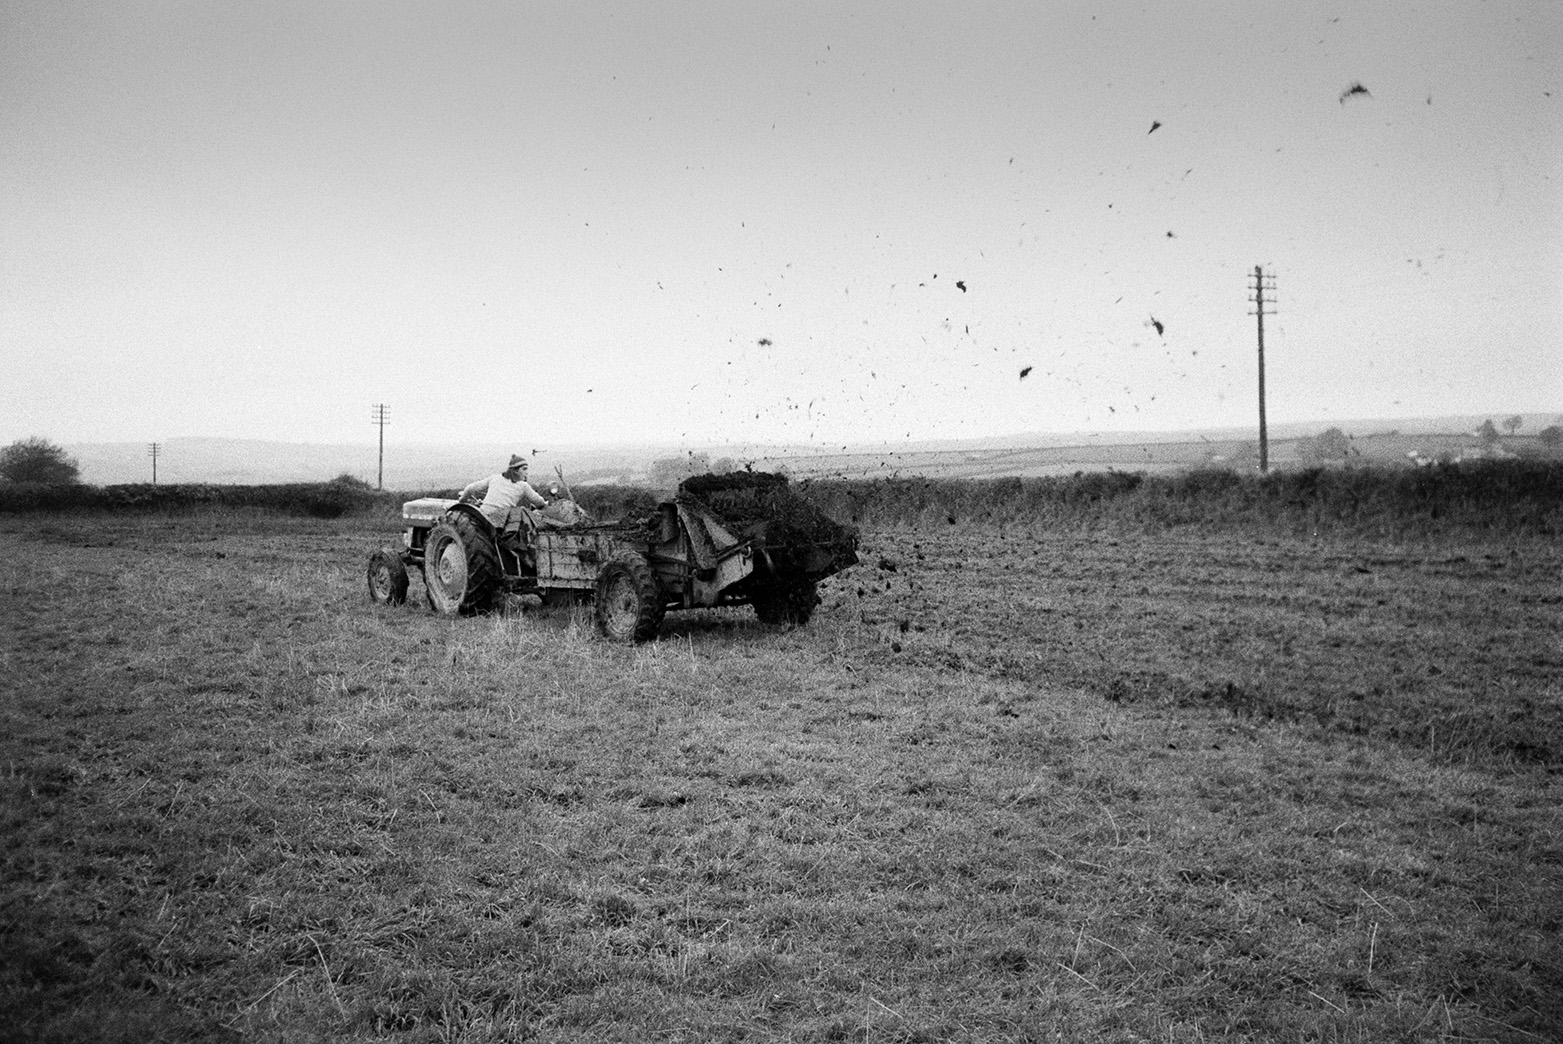 Derek Bright muckspreading in a field at Mill Road Farm, Beaford, using a muck spreader. The farm was also known as Jeffrys.